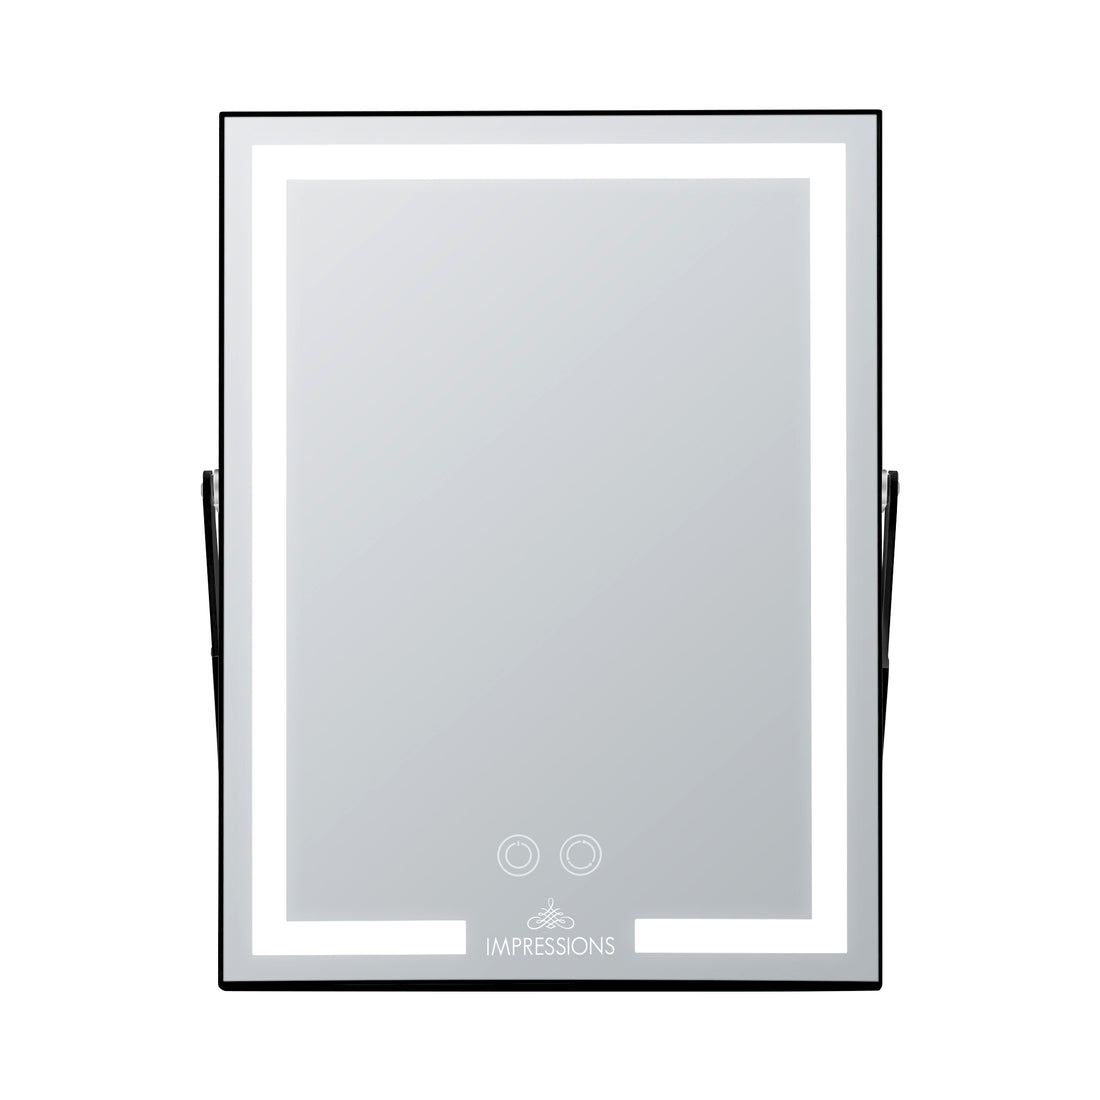 Straight On The Muse Tri Tone LED Easel Makeup Mirror Impressions Vanity 